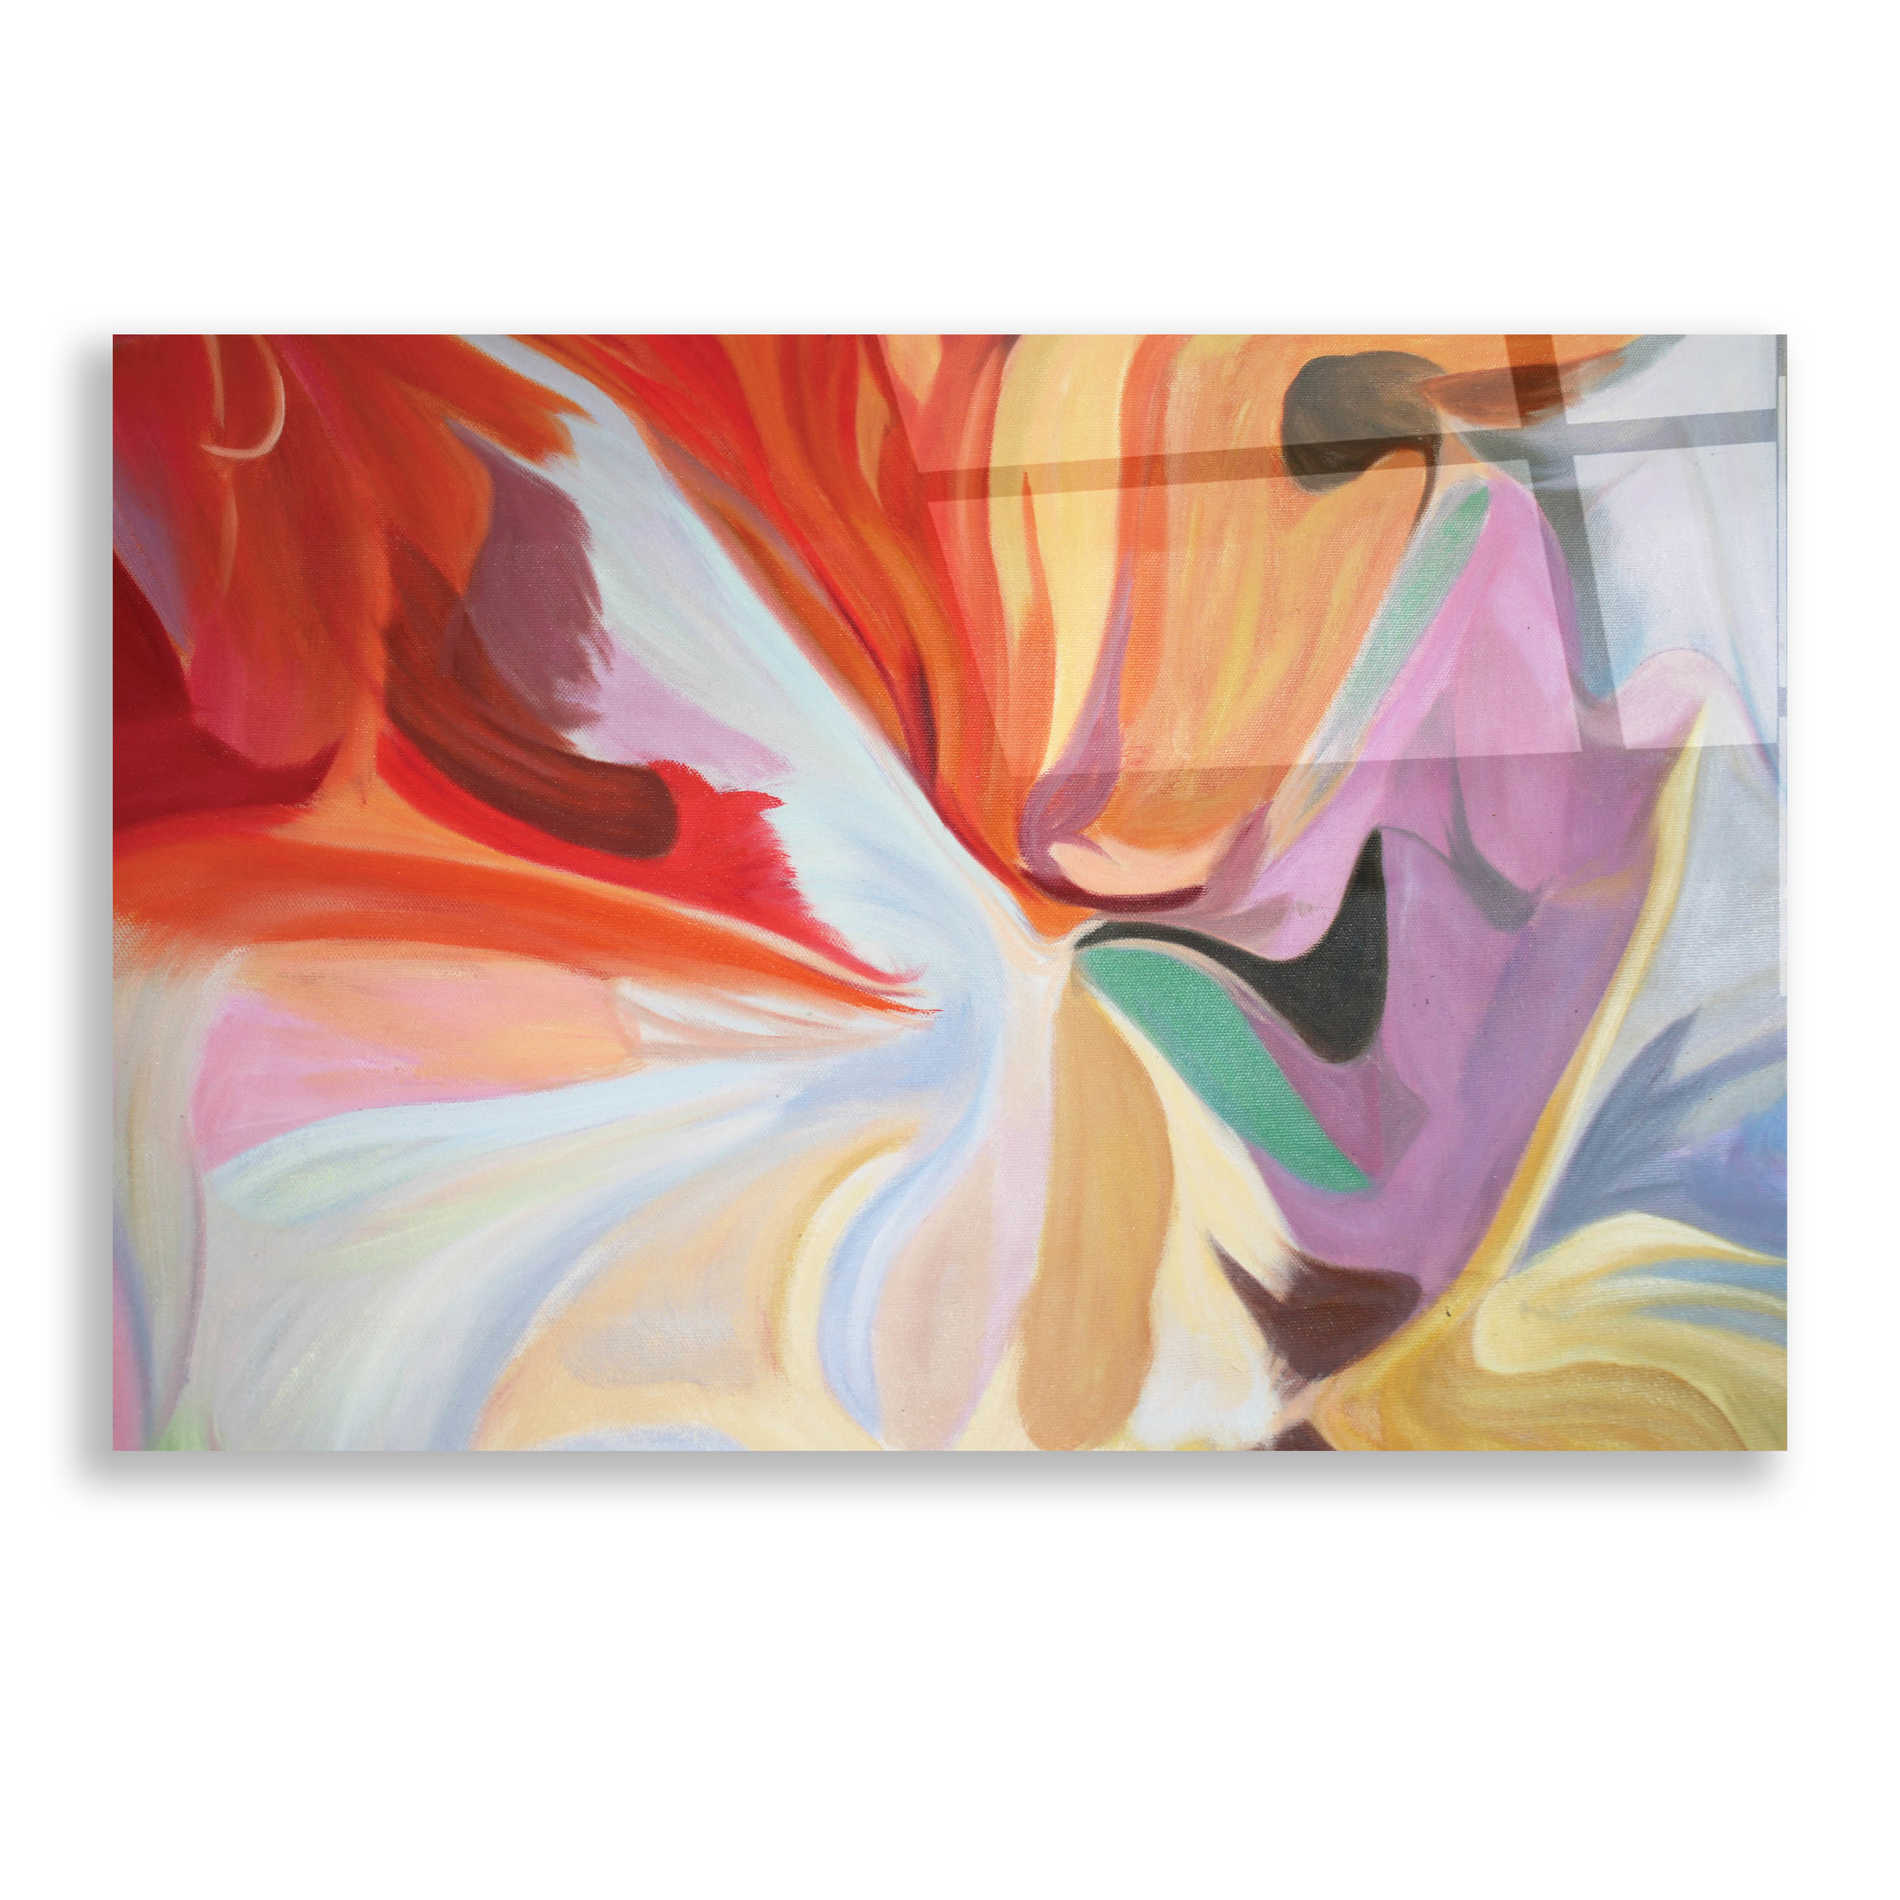 Epic Art 'Notes of Elegance 8' by Irena Orlov, Acrylic Glass Wall Art,24x16